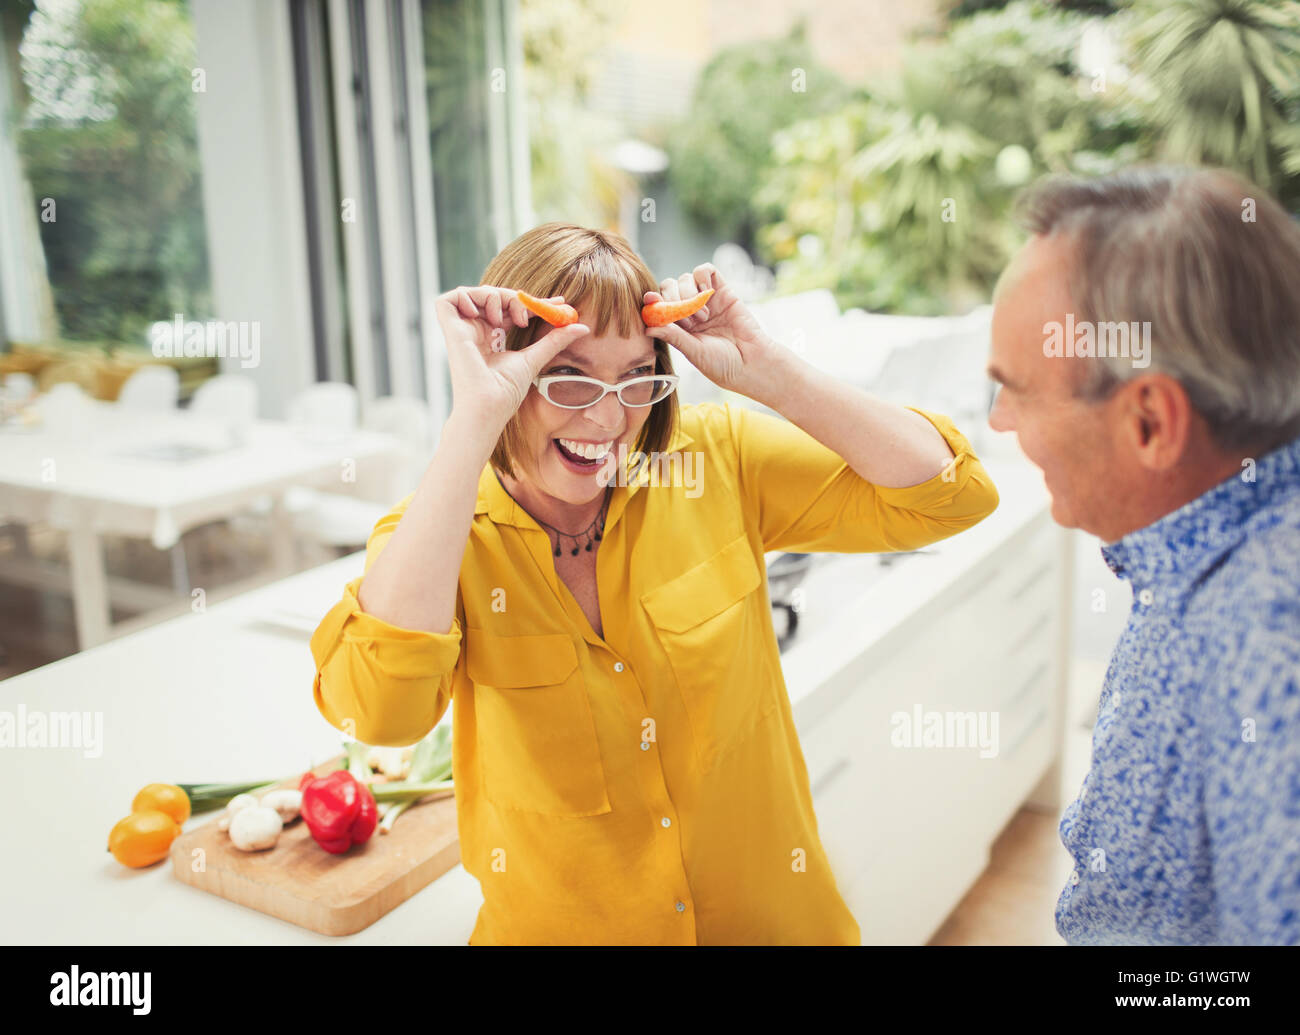 Playful mature woman gesturing carrot horns in kitchen Stock Photo